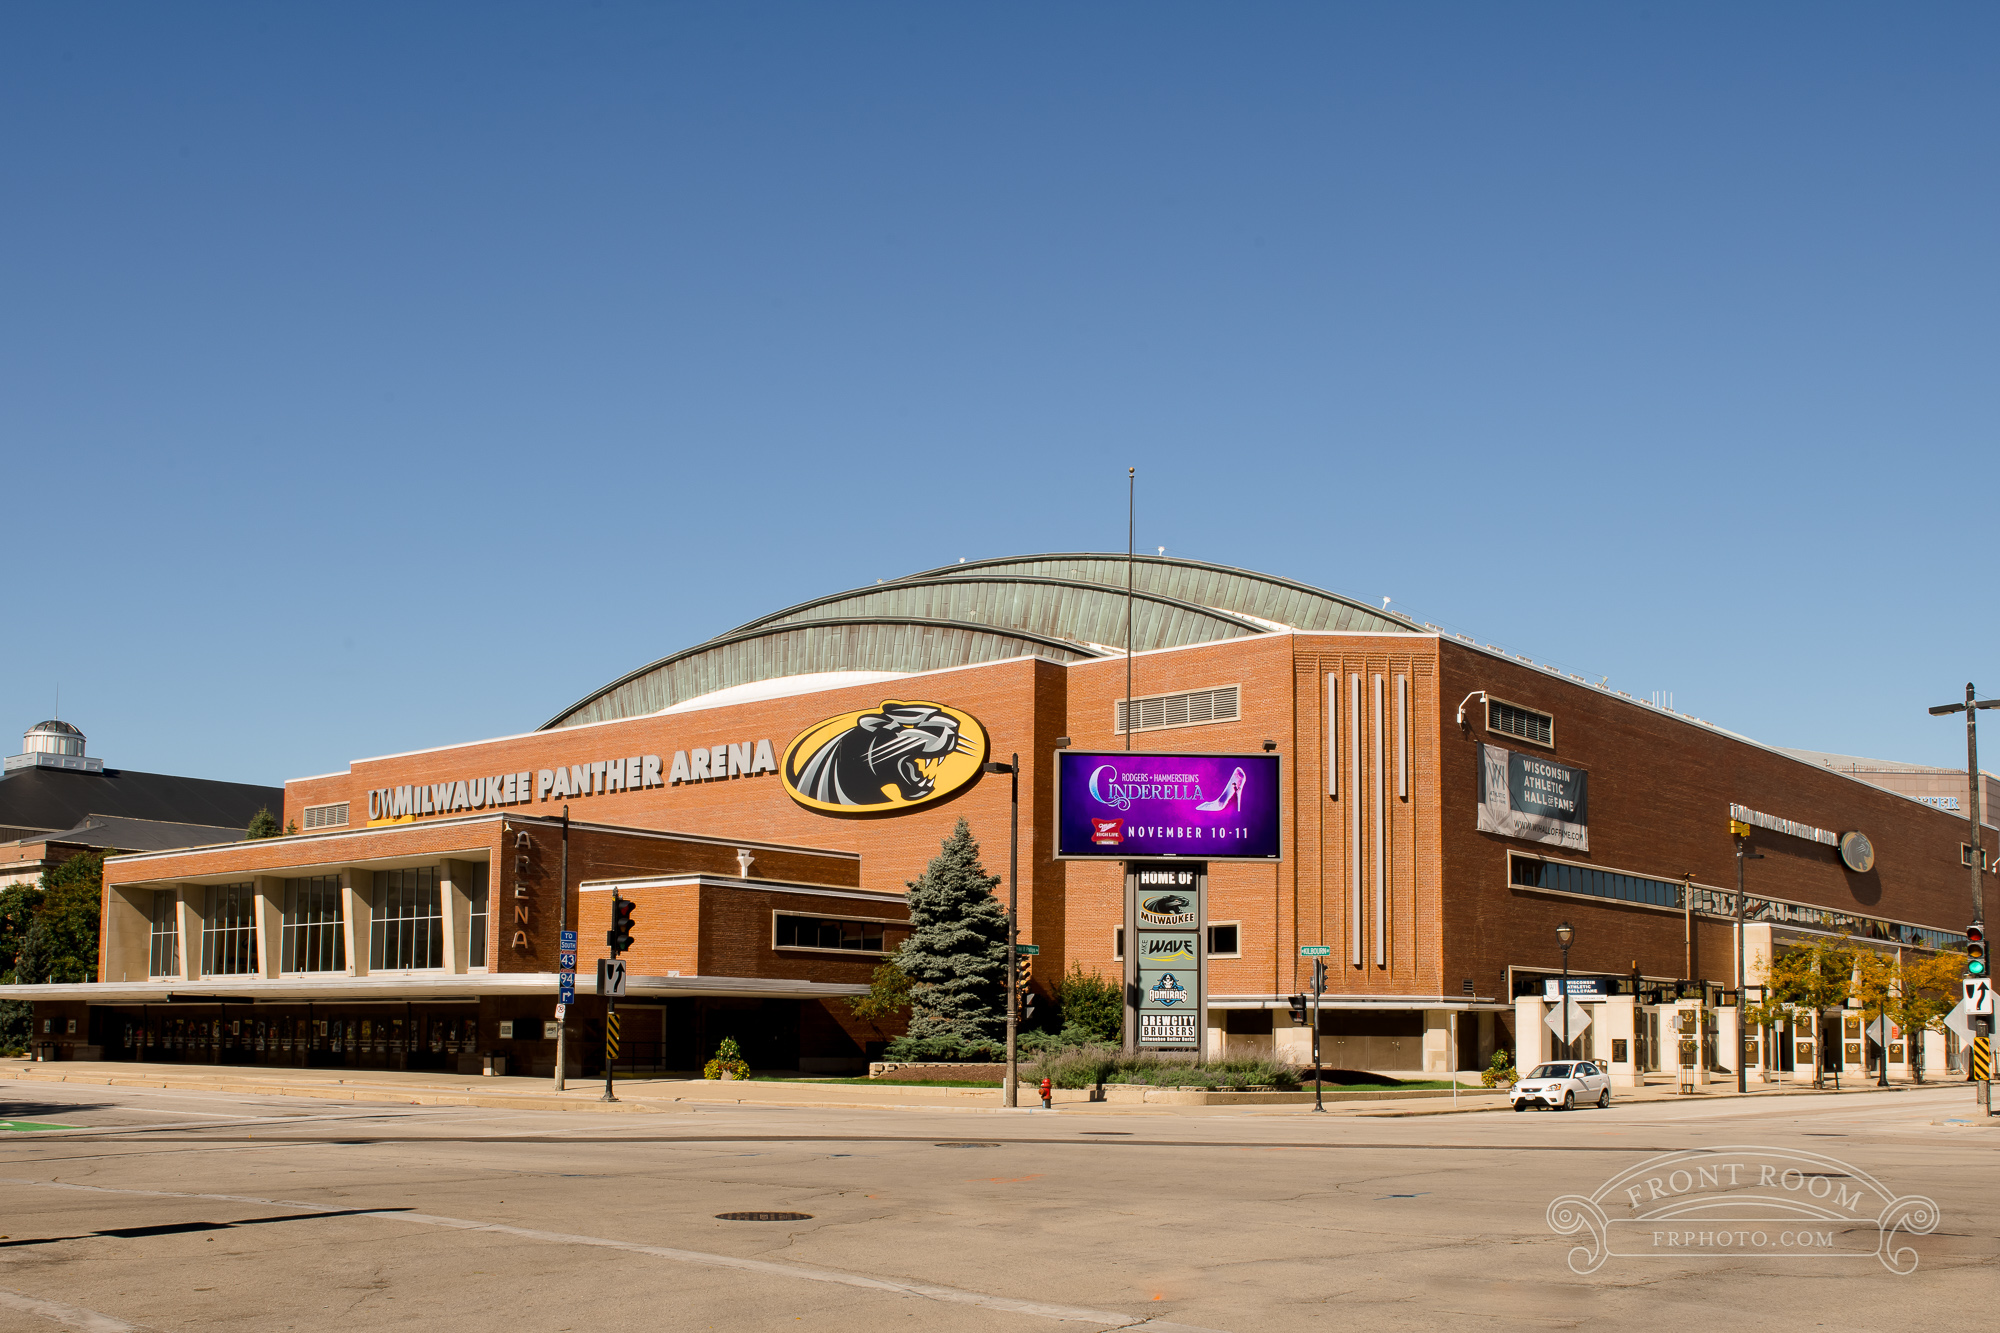 graydient creative, uwm panther arena, wisconsin center, milwaukee rep,  miller high life theatre, exteriors, commercial photographer, front room studios